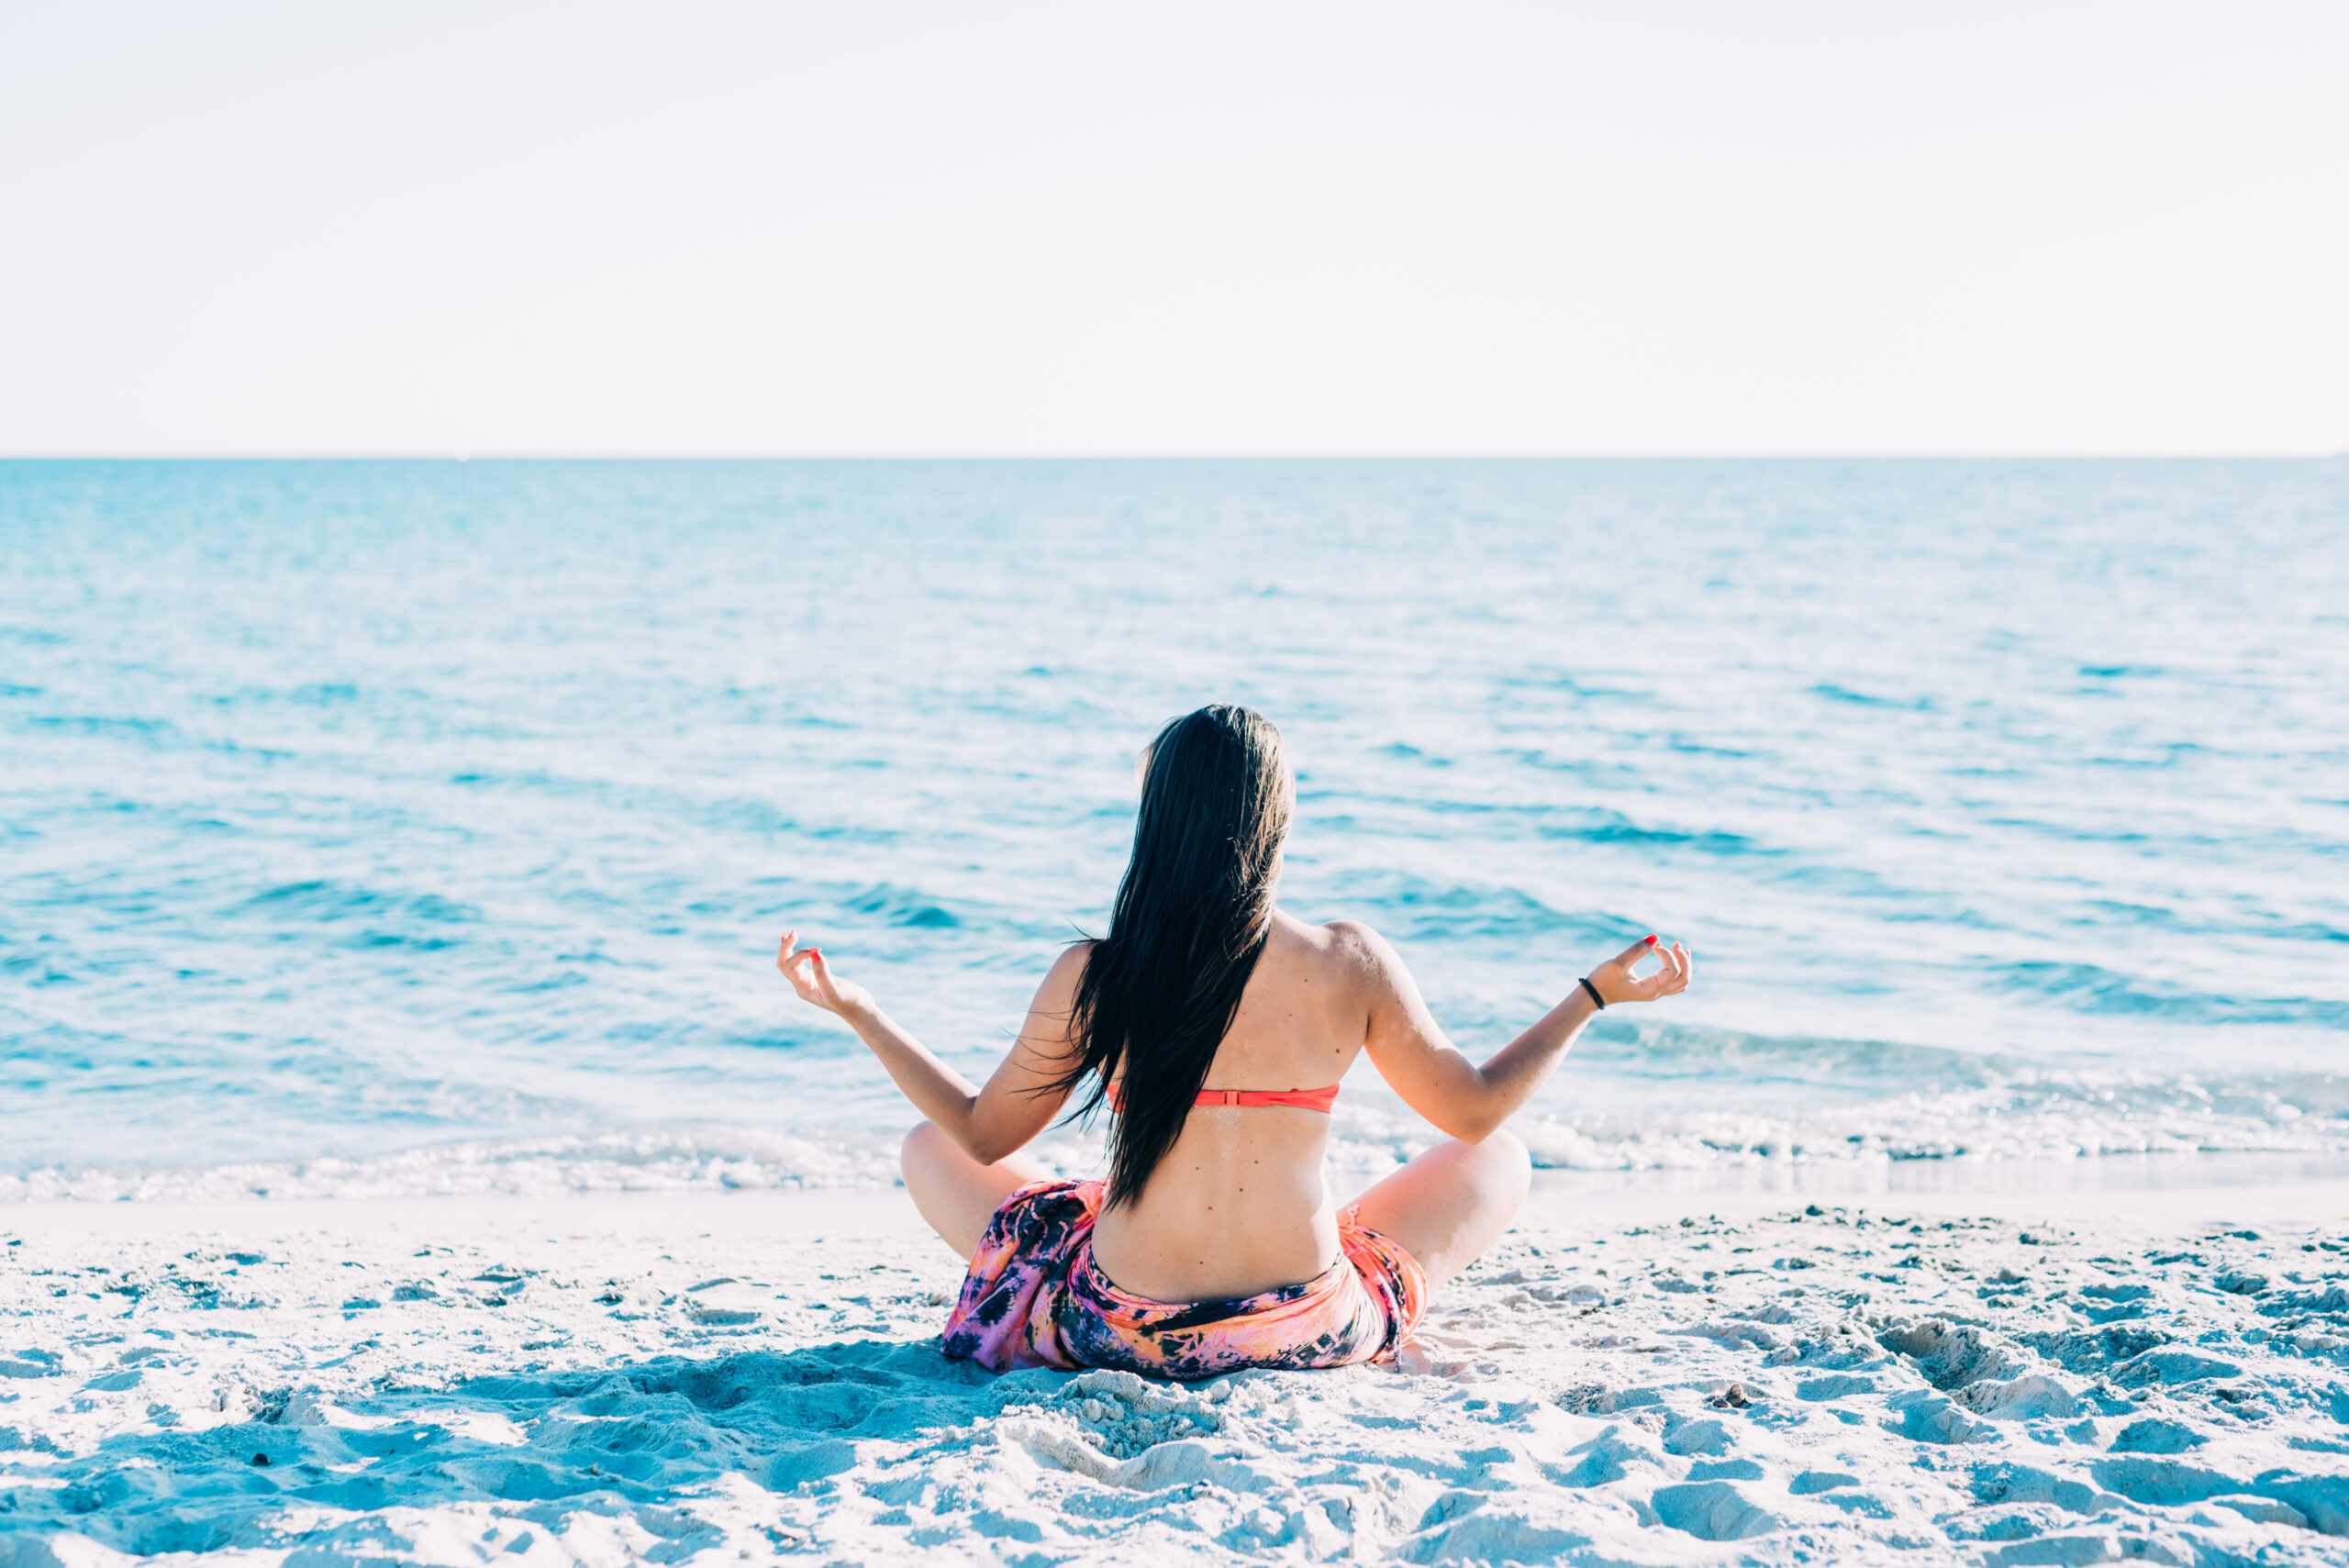 graphicstock back view of young beautiful woman doing yoga at the beach in summertime in lotus position relax meditation spiritually concept B6lwosmq1Z scaled